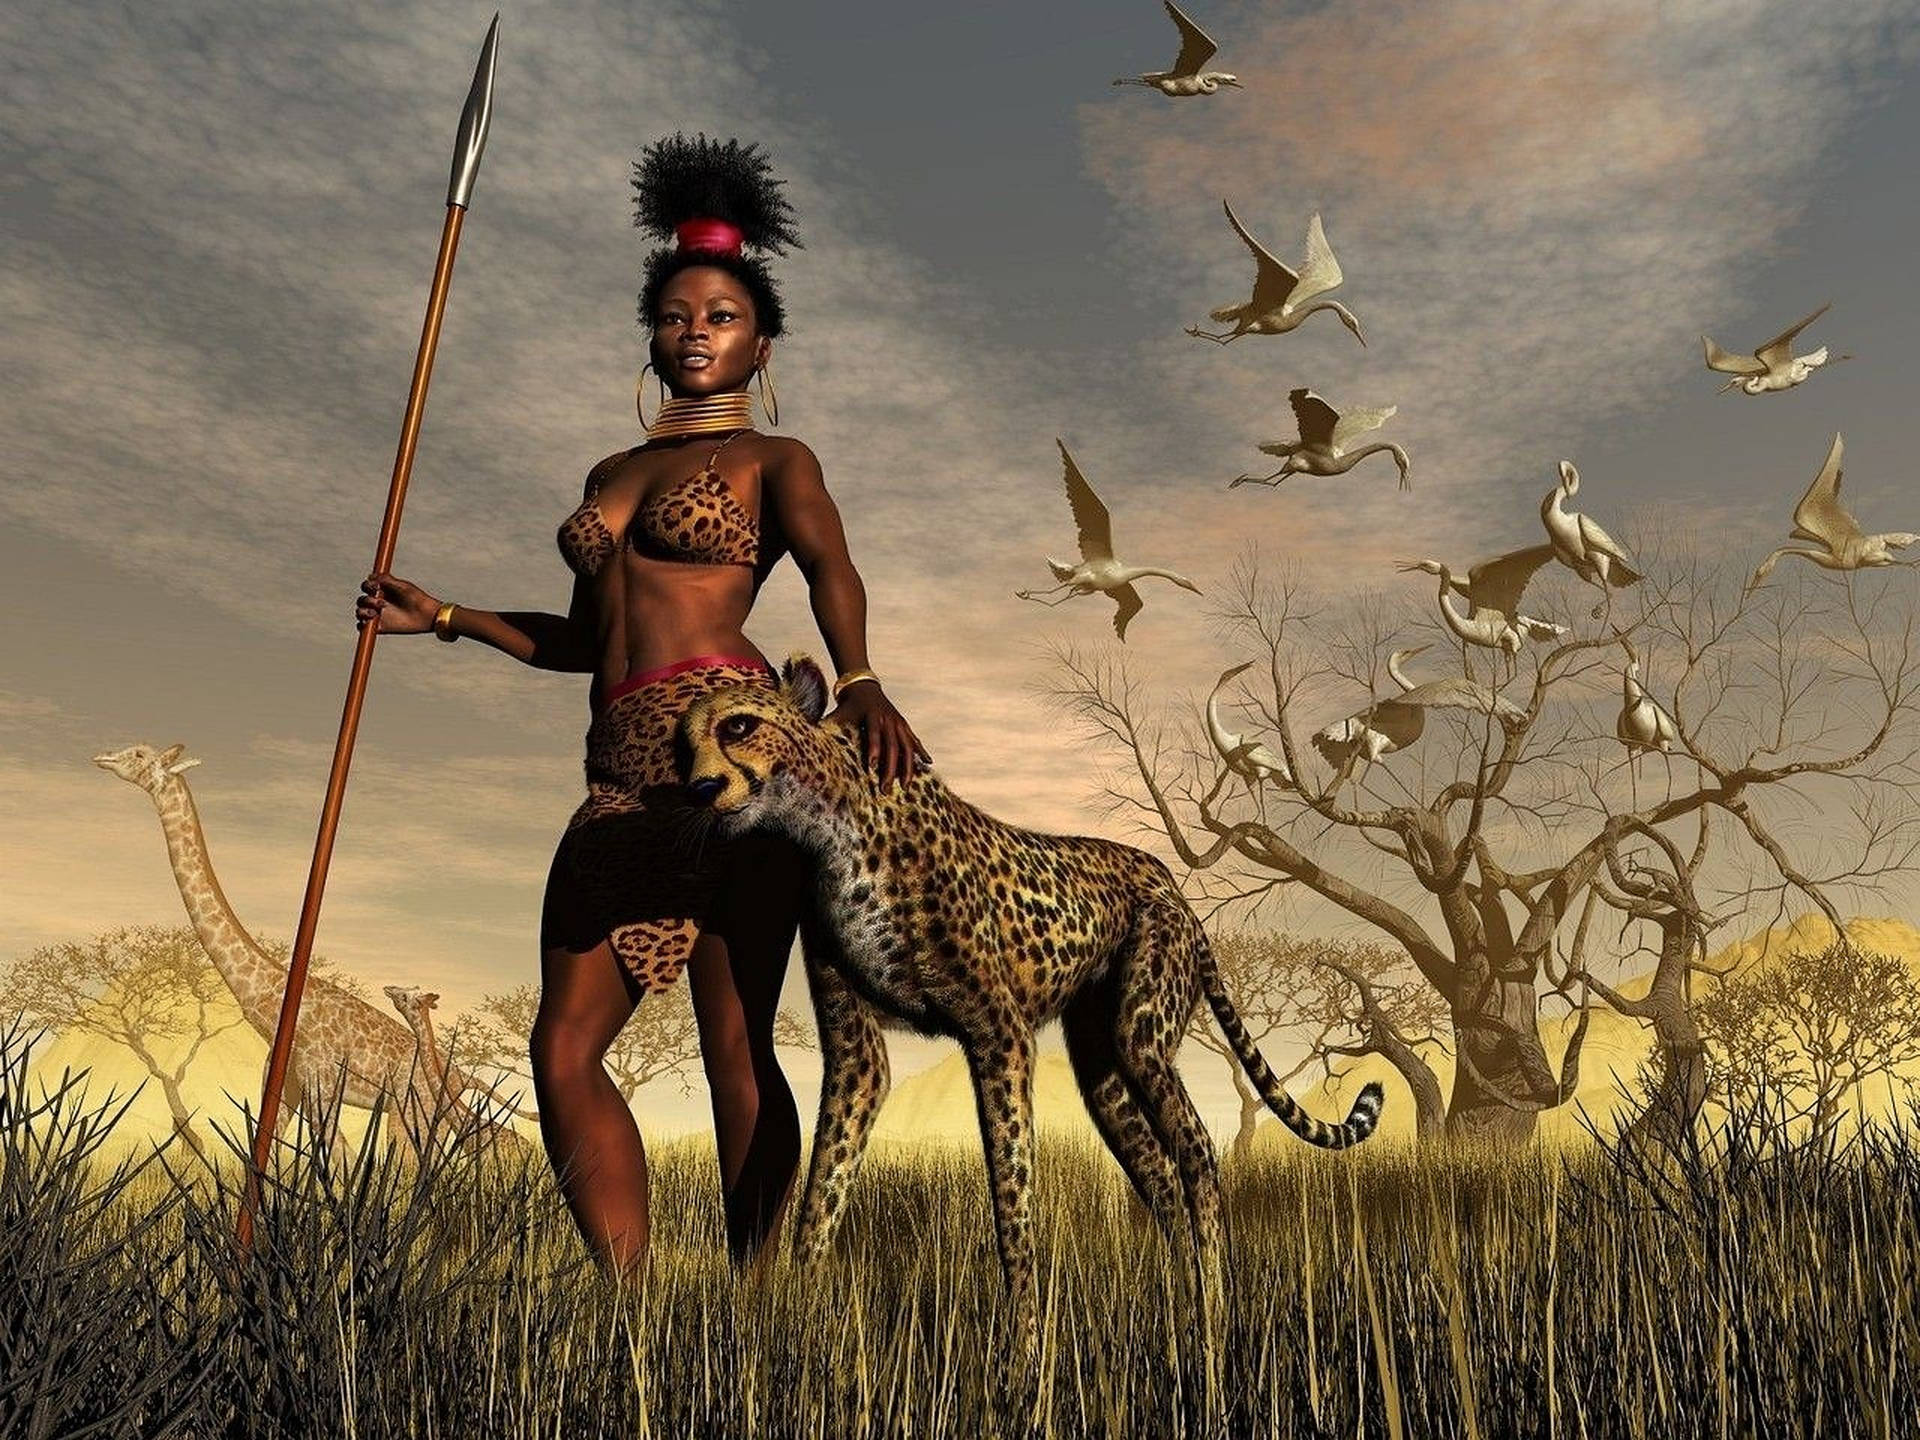 Female African Warrior Art Picture